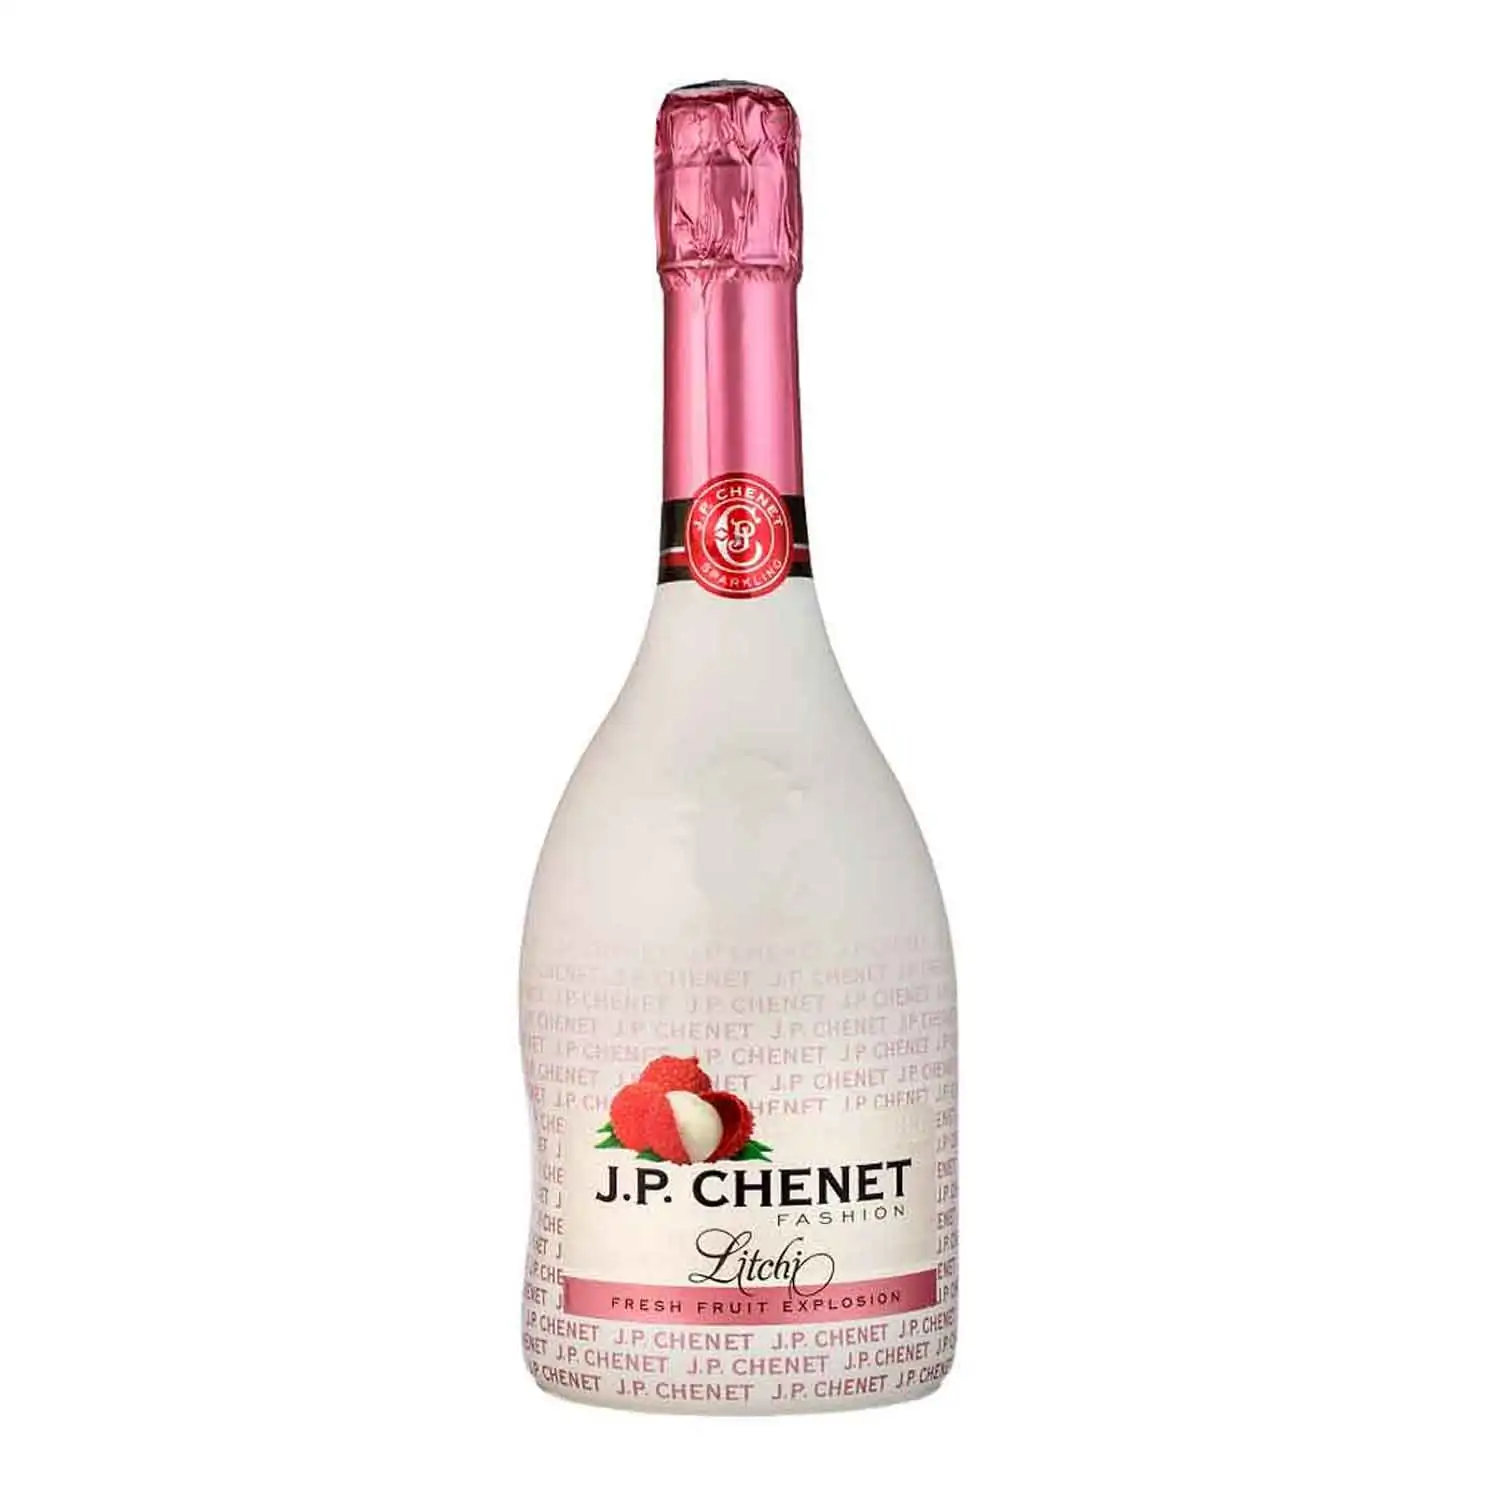 JP Chenet fashion litchi 75cl Alc 12%  - Buy at Real Tobacco